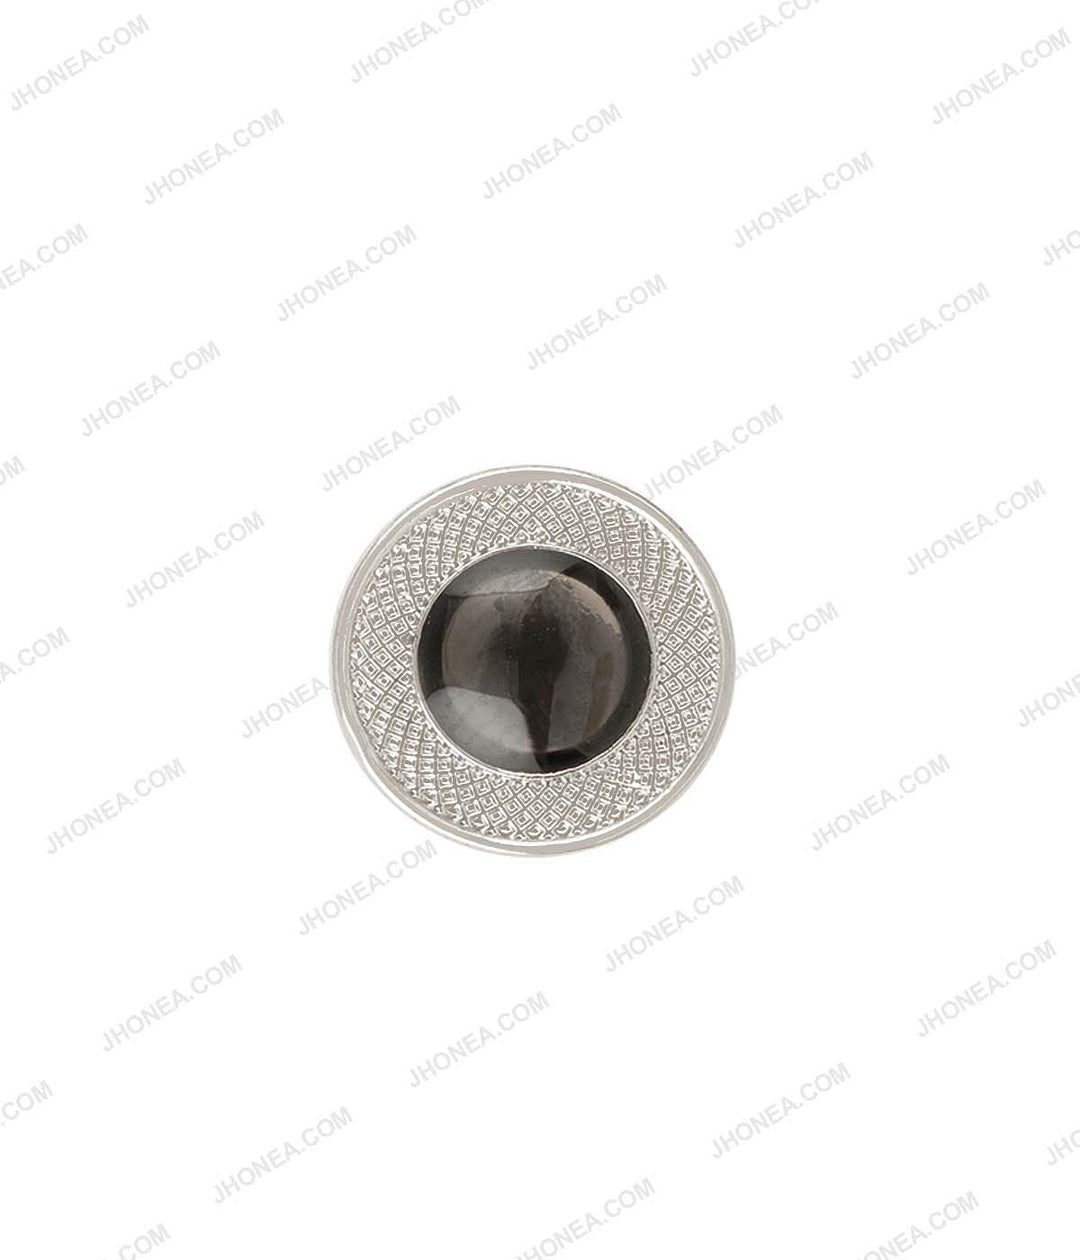 Shiny Silver Engraved lines Rim Border with Black Drop Shirt Buttons